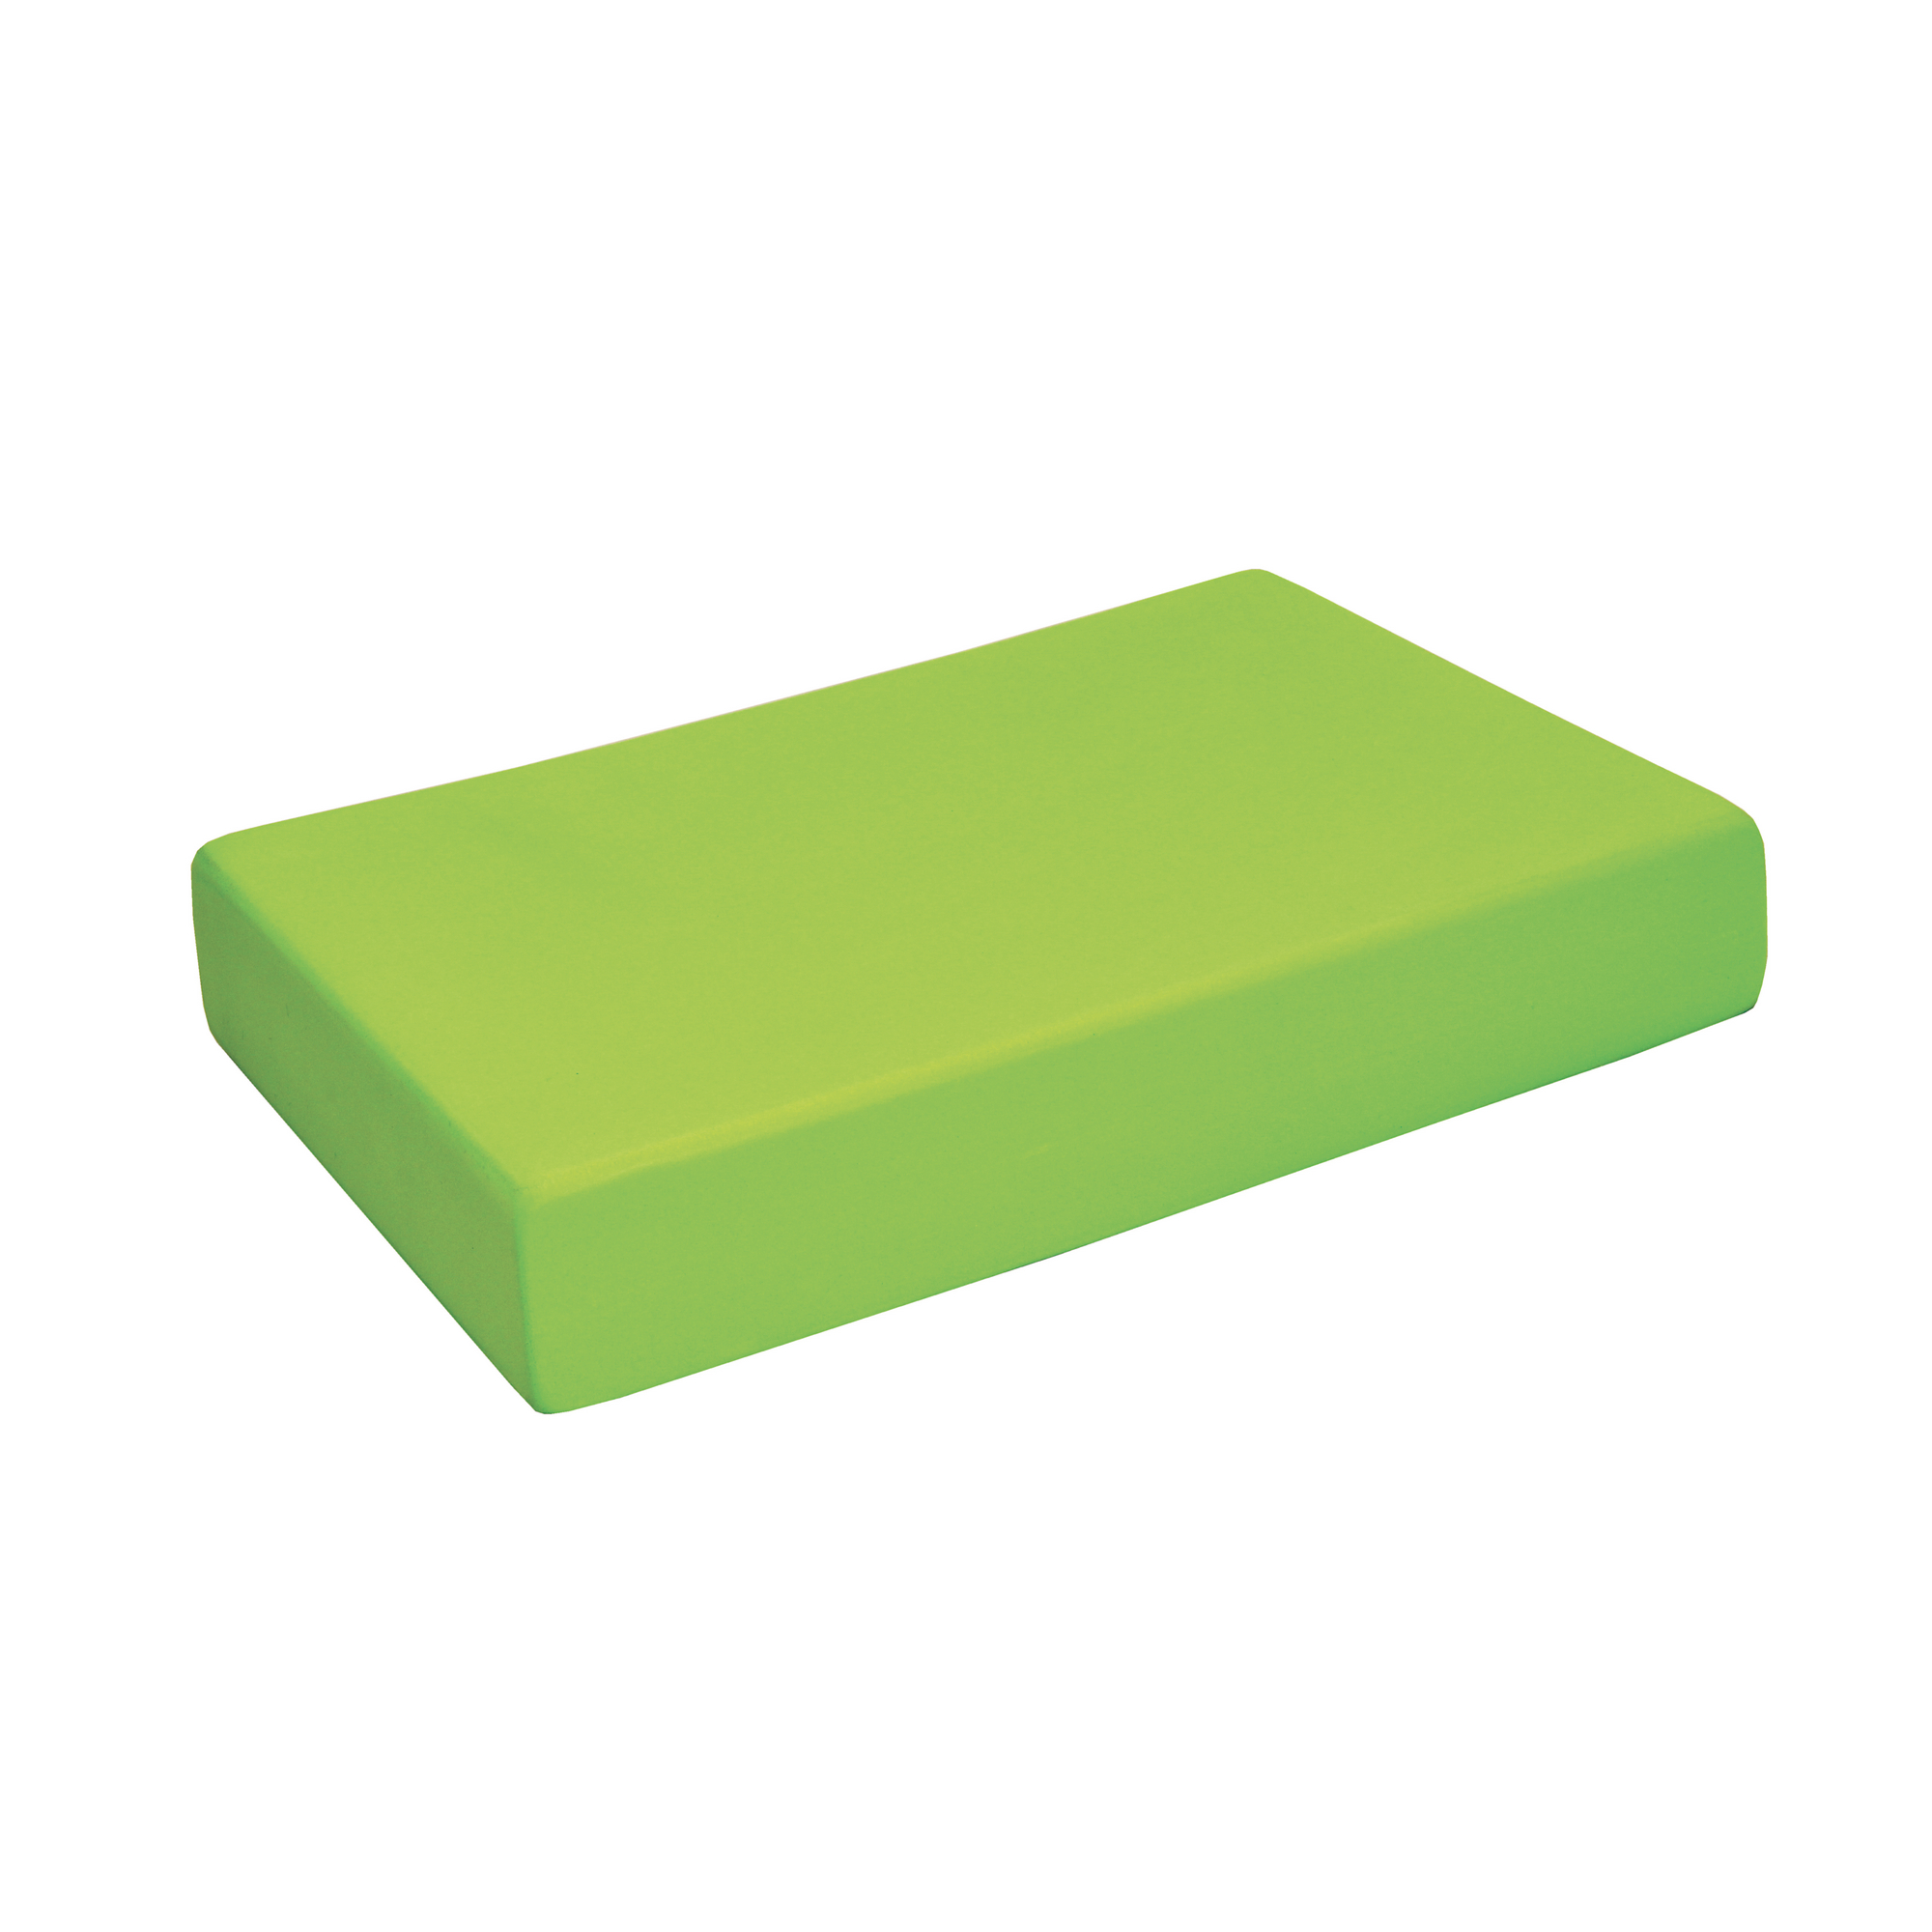 Fitness Mad Yoga Block Lime Green